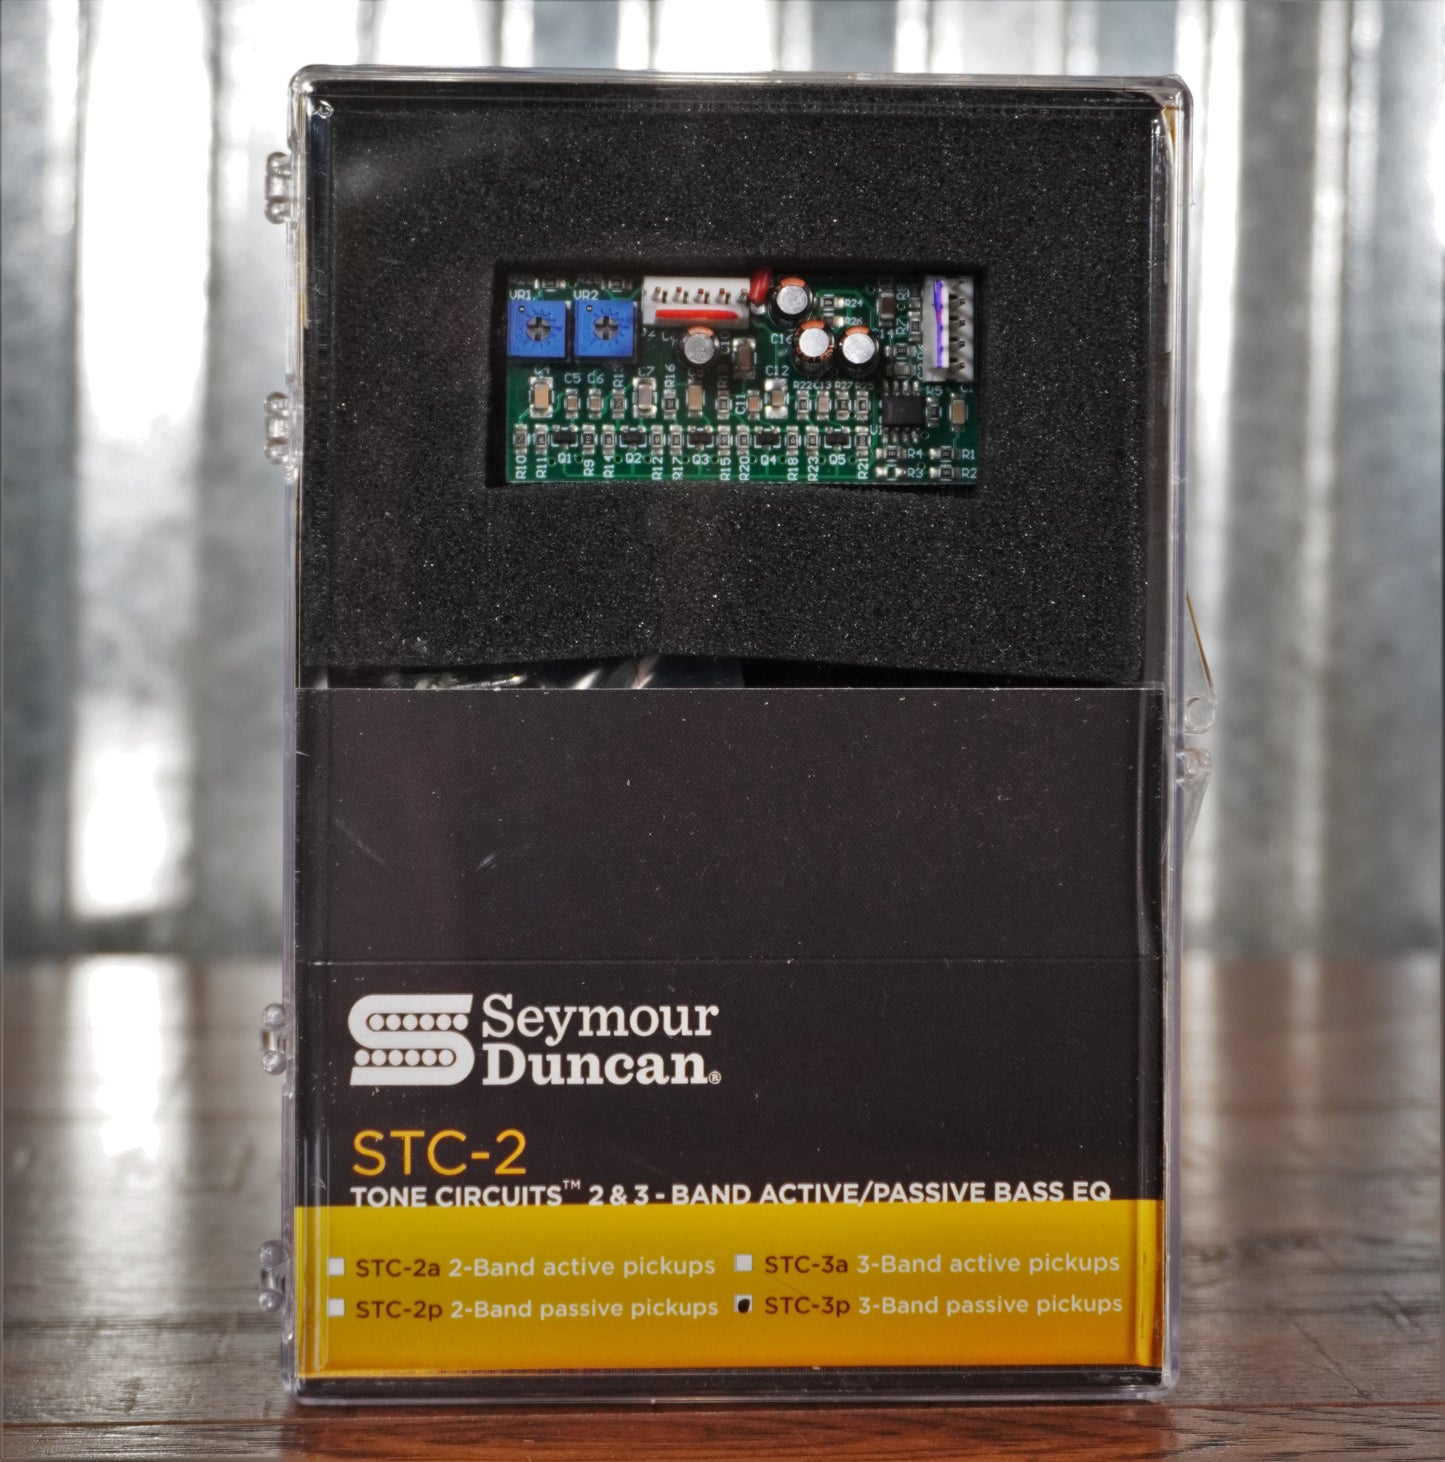 Seymour Duncan STC-3P 3-Band Preamp for Passive Pickups